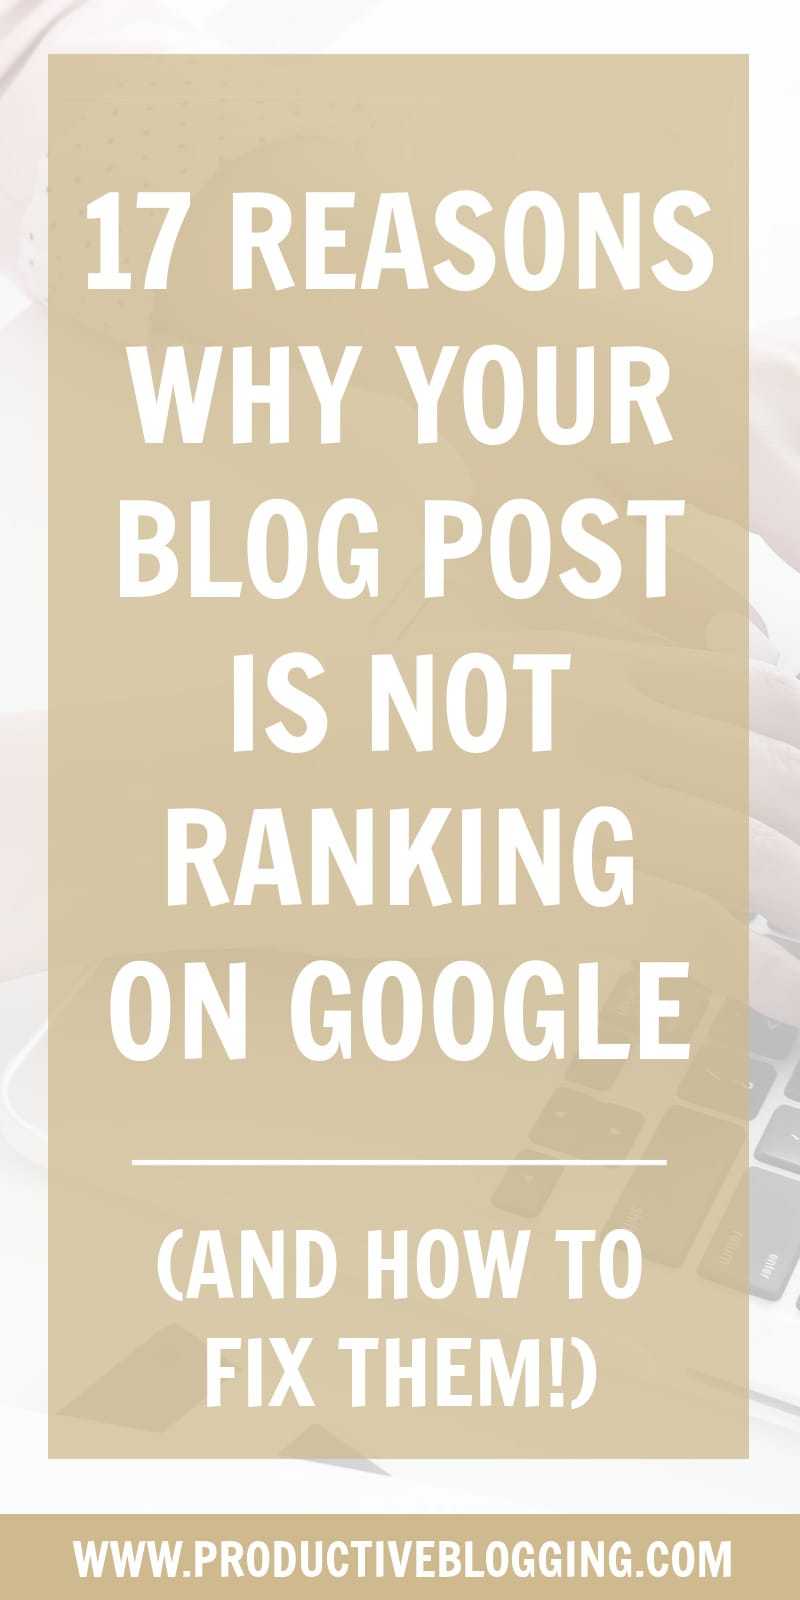 Are you wondering why your blog post is not ranking on Google? It’s so frustrating… You’ve written a brilliant post, you thought you’d done everything right, but it’s STILL not ranking! Here are 17 reasons why your blog post is not ranking on Google (And how to fix them!) #seo #seotips #blogpost #blogpostSEO #professionalblogger #bloggingismyjob #solopreneur #mompreneur #fempreneur #makemoneyblogging #contentmarketing #bloggingbiz #bloggingtips #blogsmarternotharder #productiveblogging